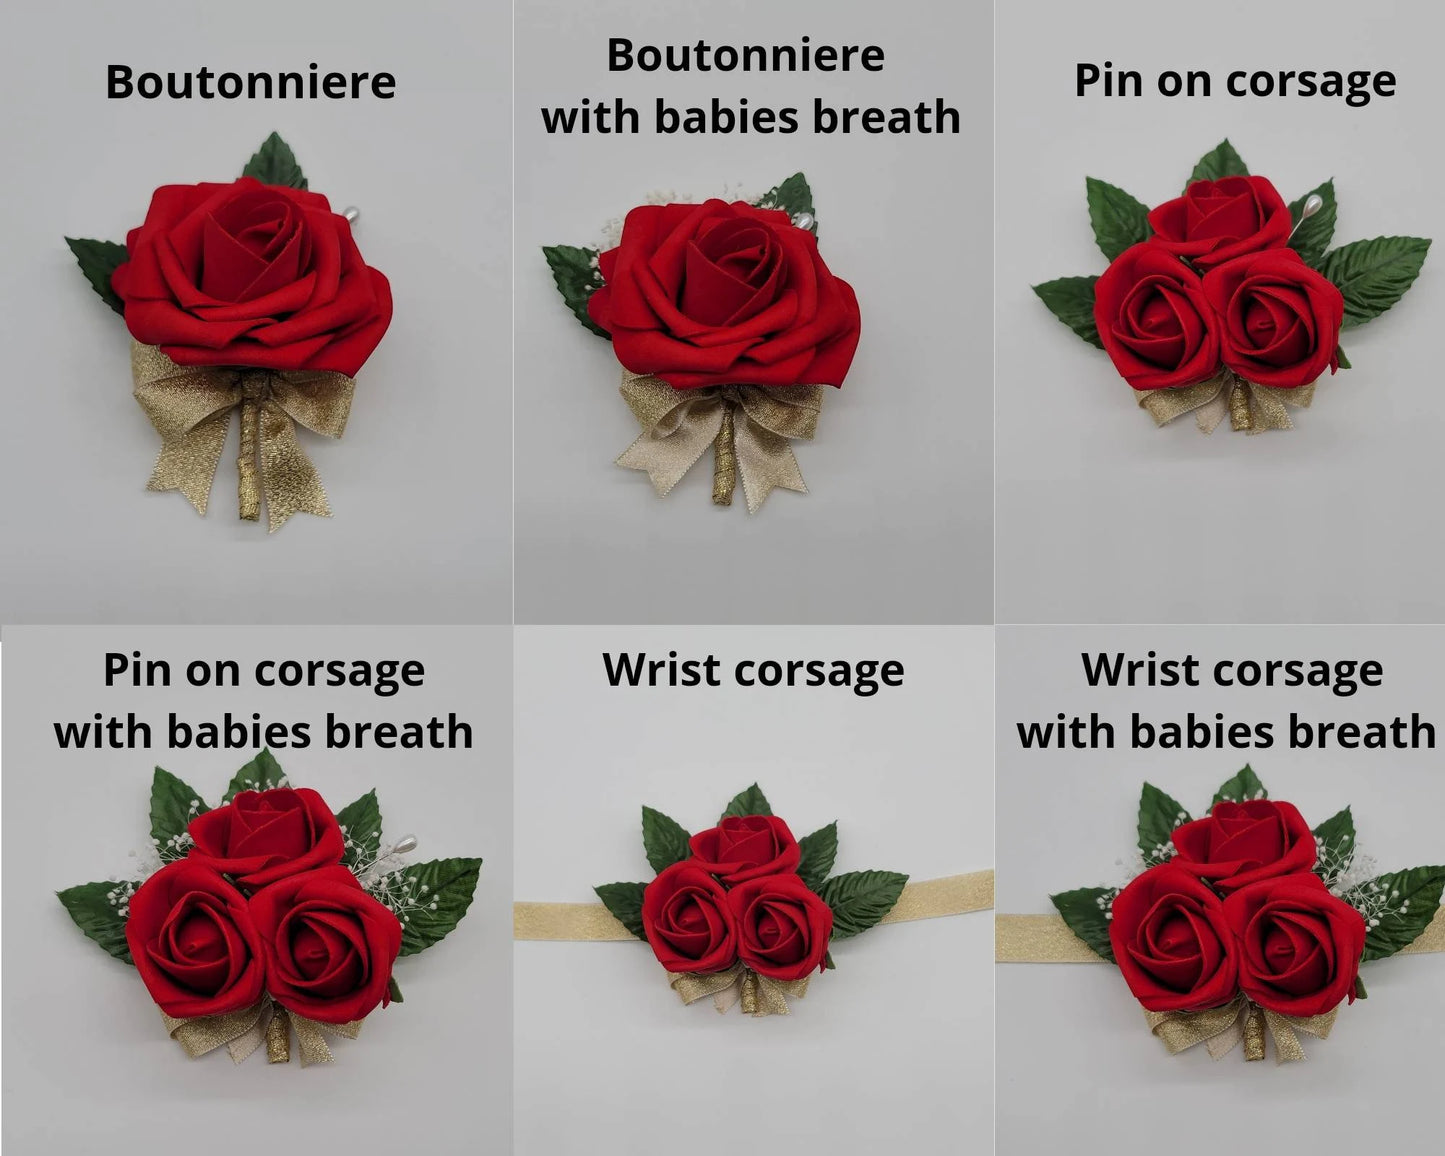 Ivory and Burlap Boutonnieres and Corsages